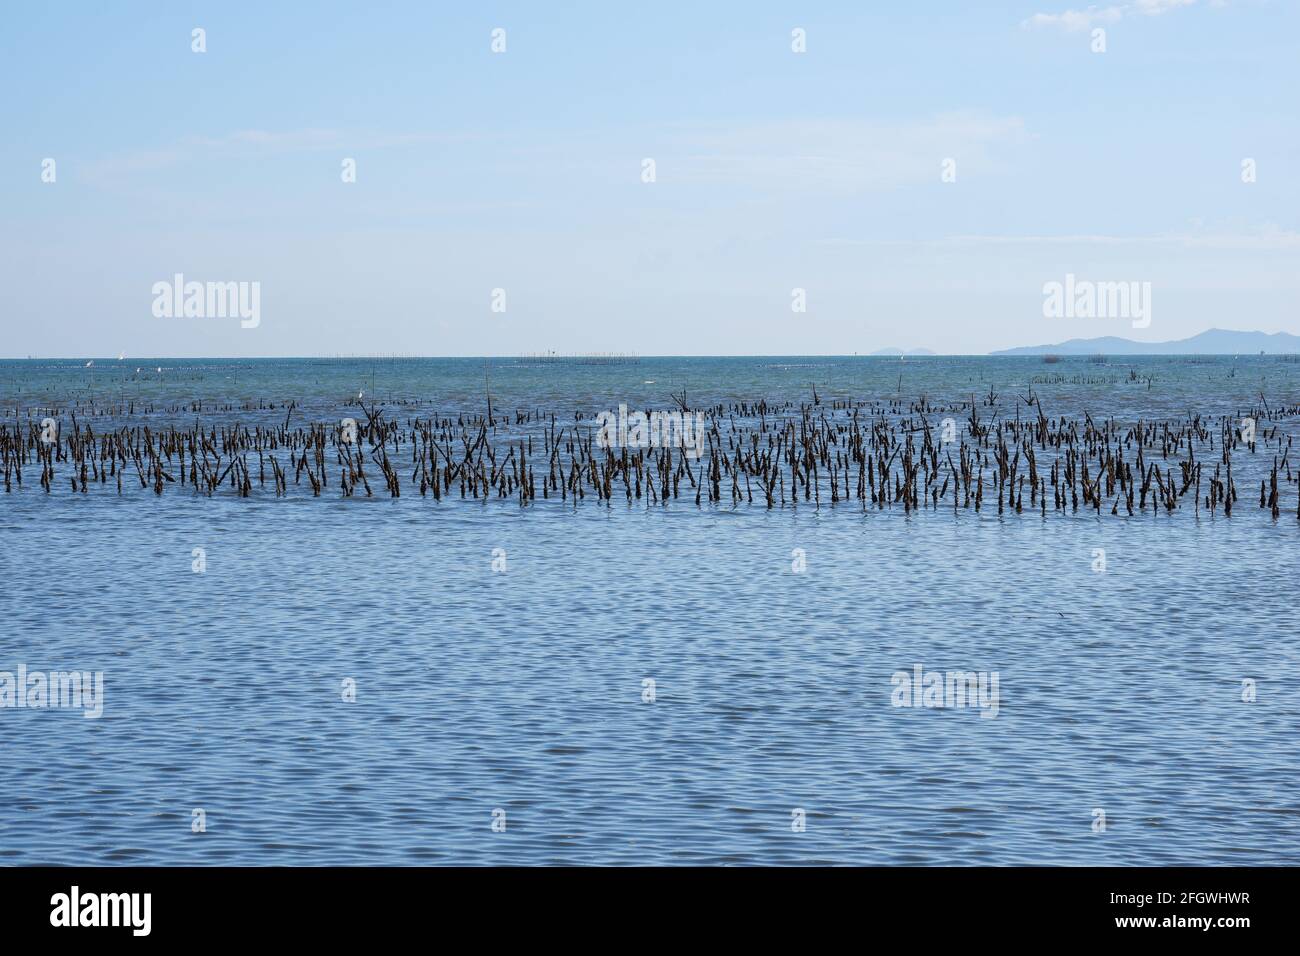 The low tide revealed rows of mussels growing on cloaks attached to a pole in the sea. Stock Photo